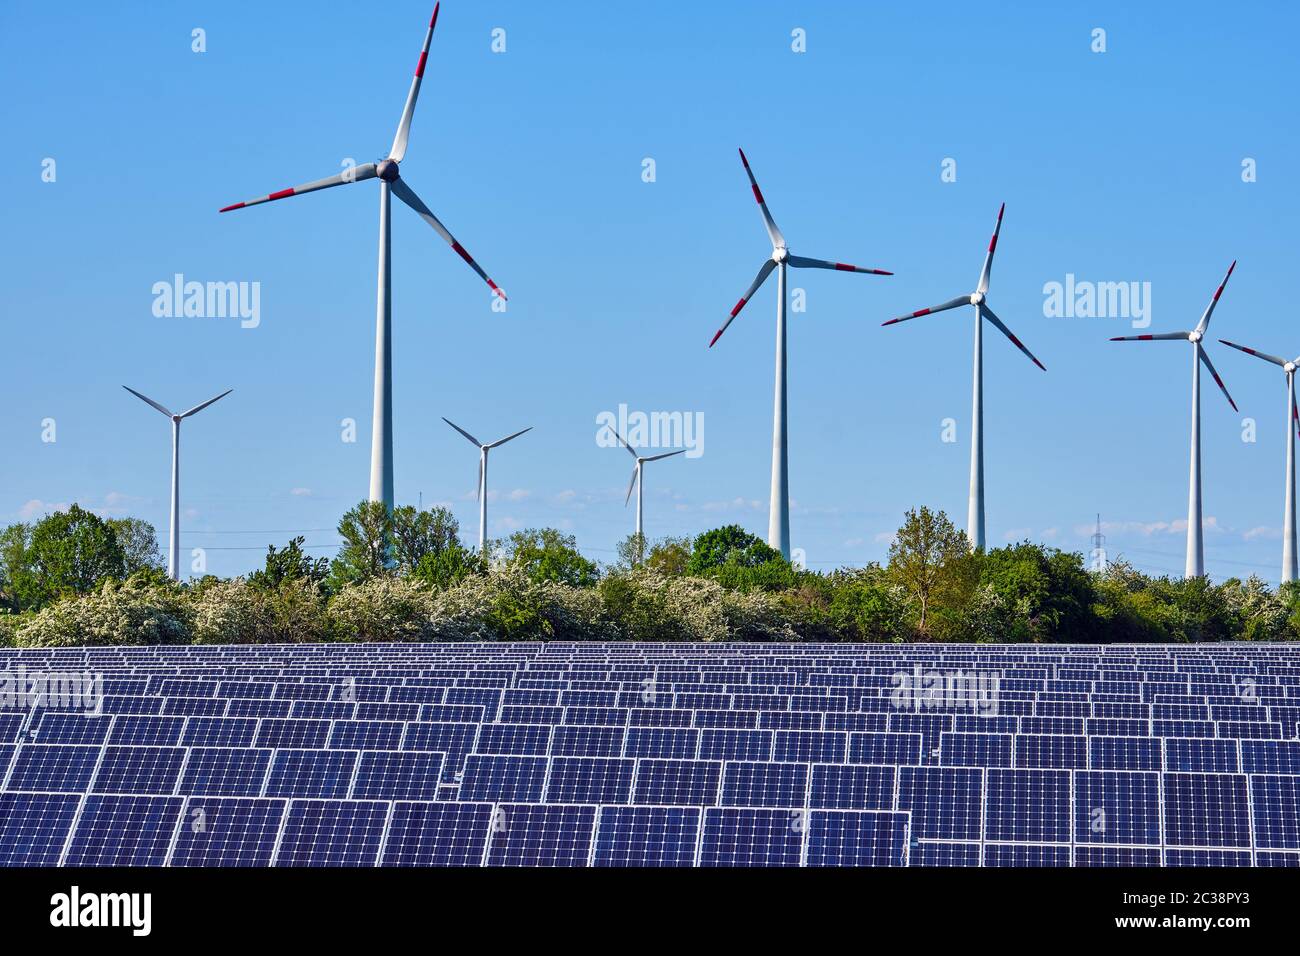 Solar panels and wind energy plants seen in Germany Stock Photo